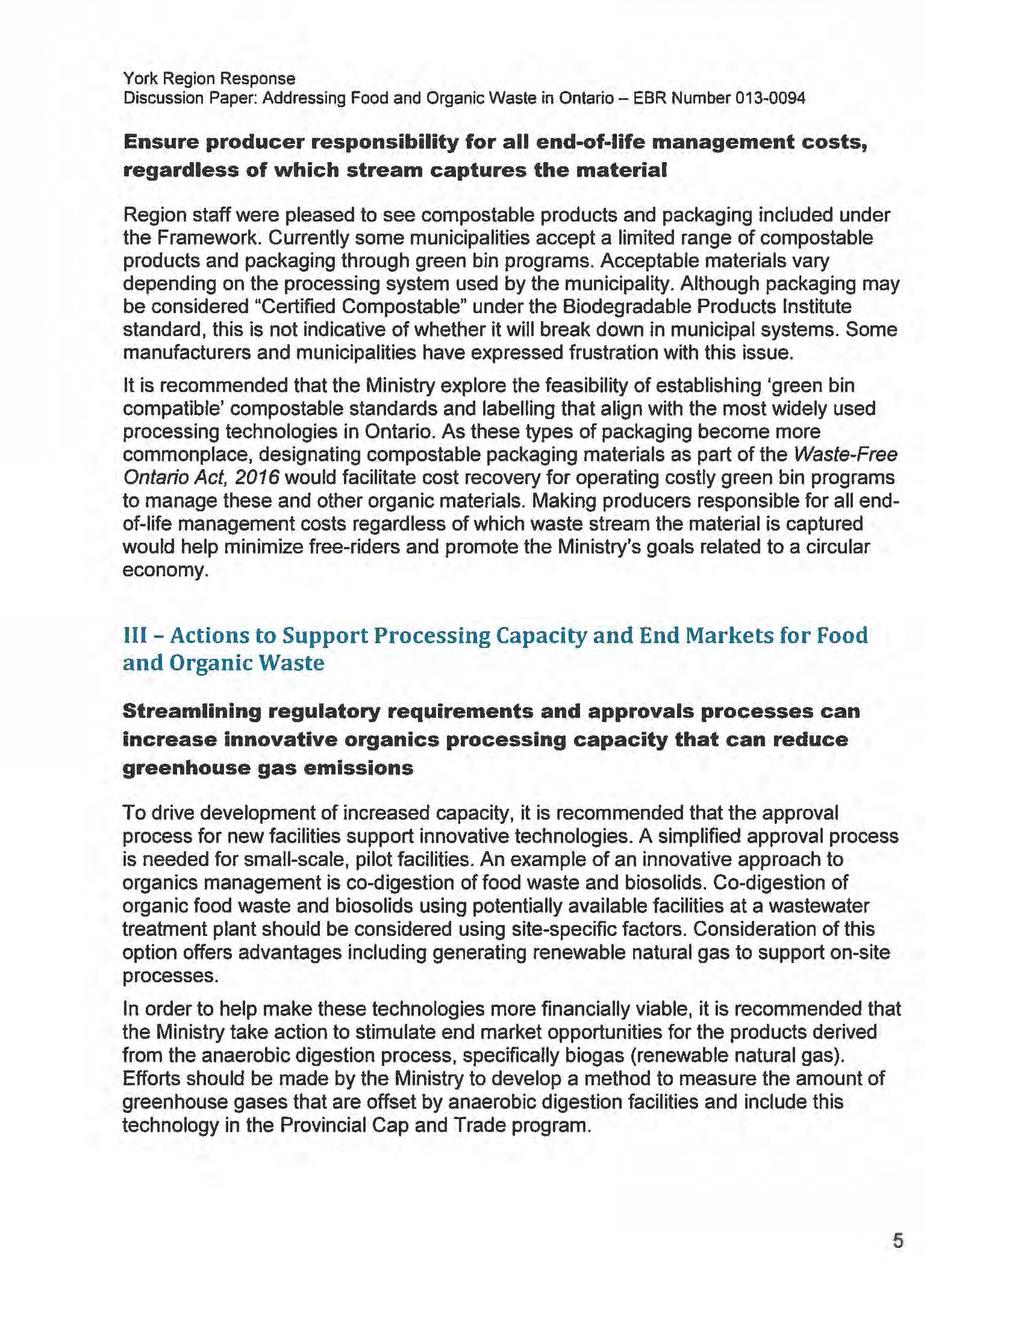 York Region Response Discussion Paper: Addressing Food and Organic Waste in Ontario- EBR Number 013-0094 Ensure producer responsibility for all end-of-life management costs, regardless of which